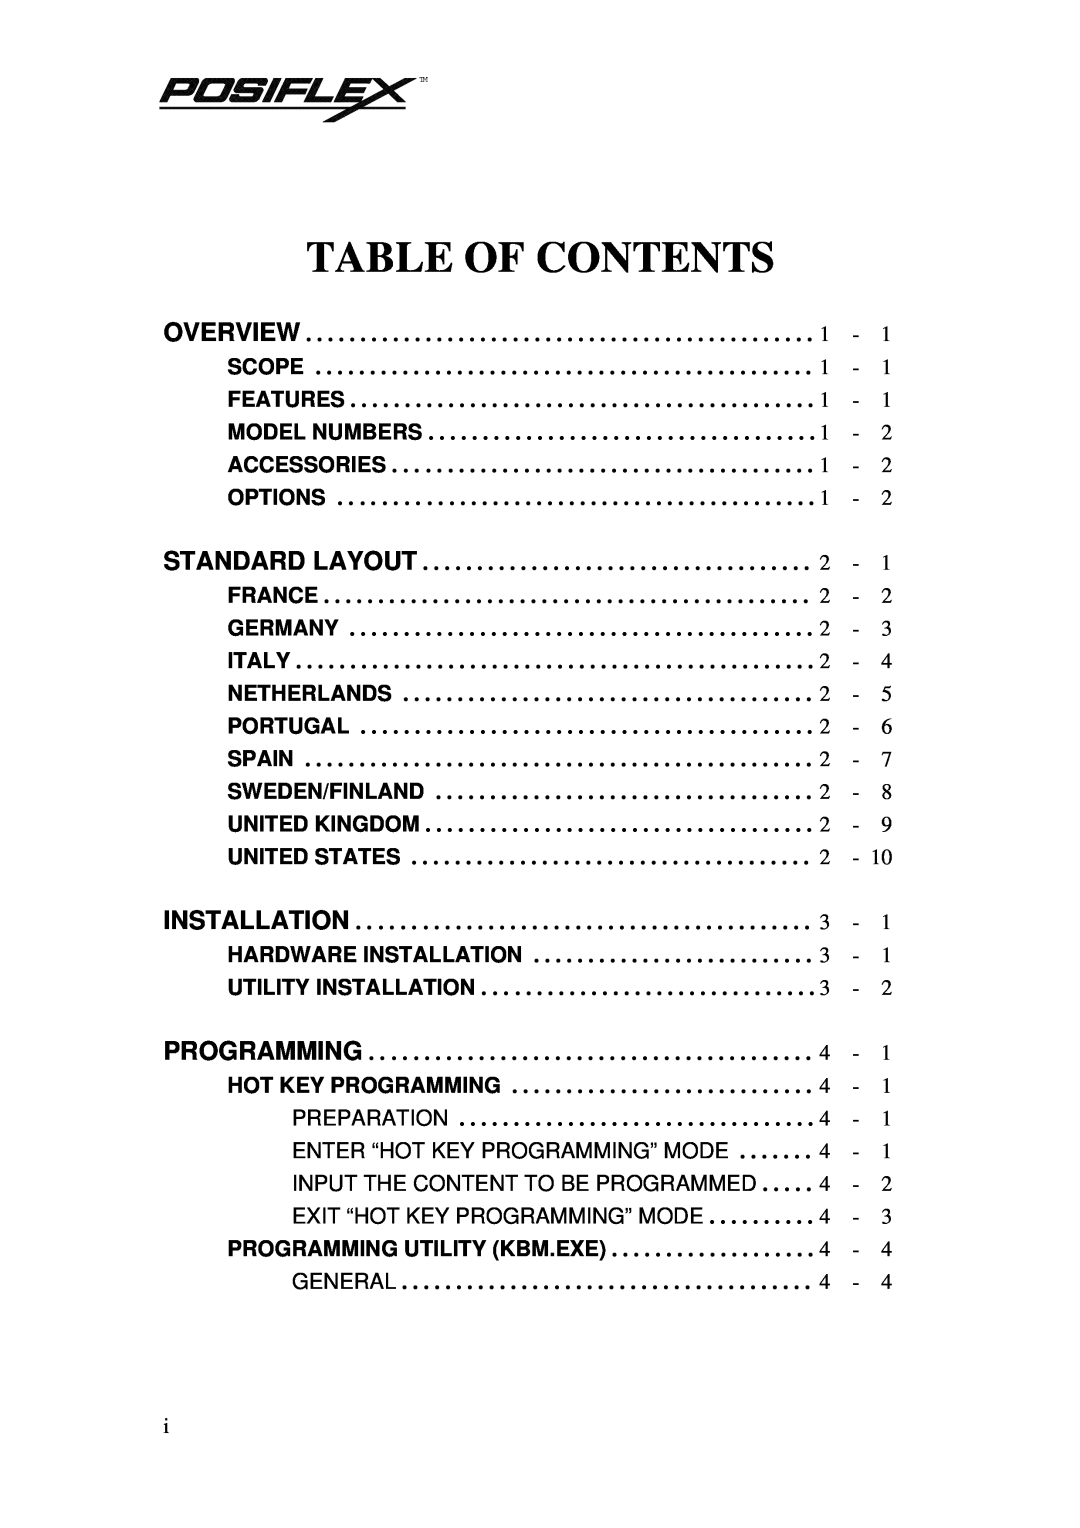 POSIFLEX Business Machines PST KB136 manual Table Of Contents 